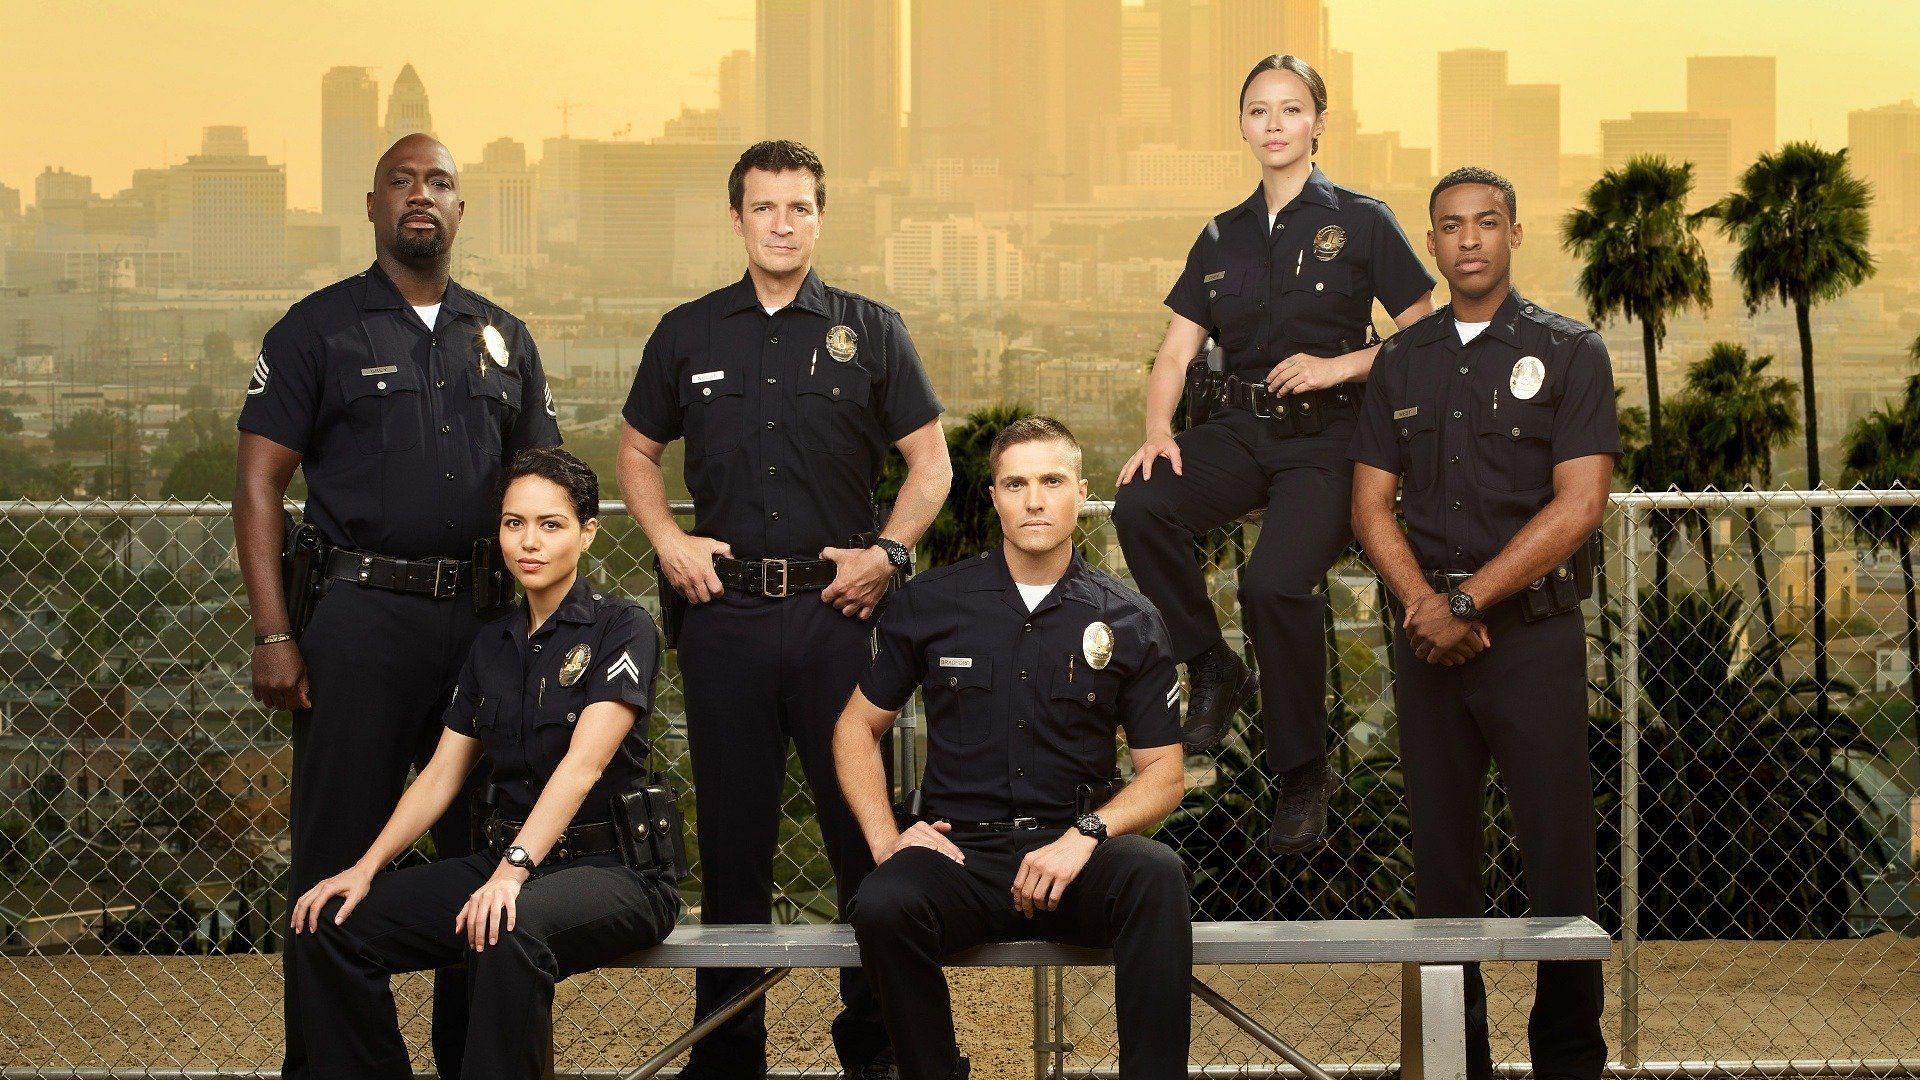 Official poster for The Rookie (Image via ABC)